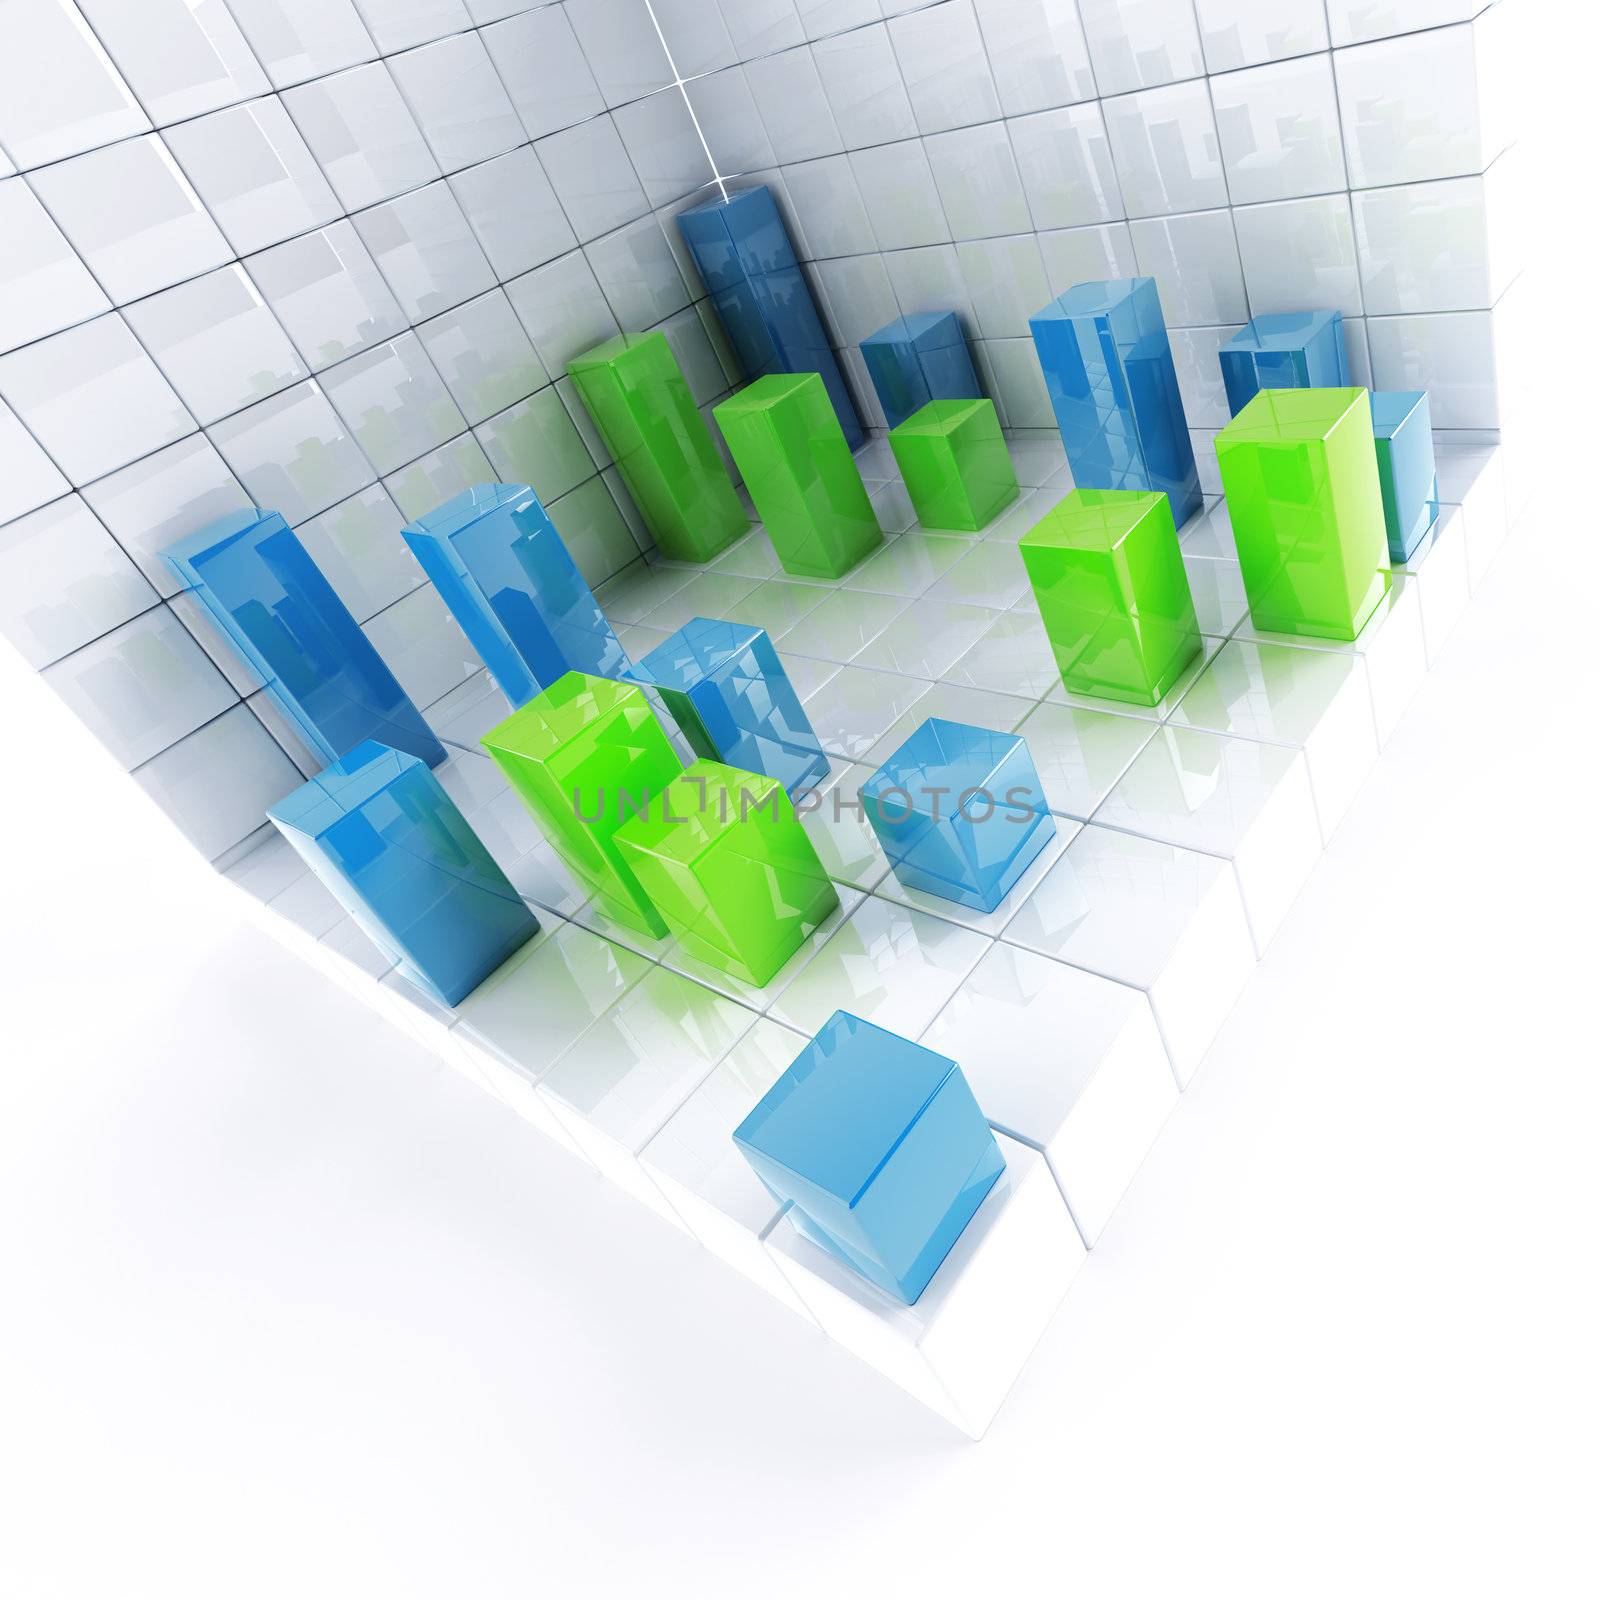 Abstract cubes of blue and green color as a technological background